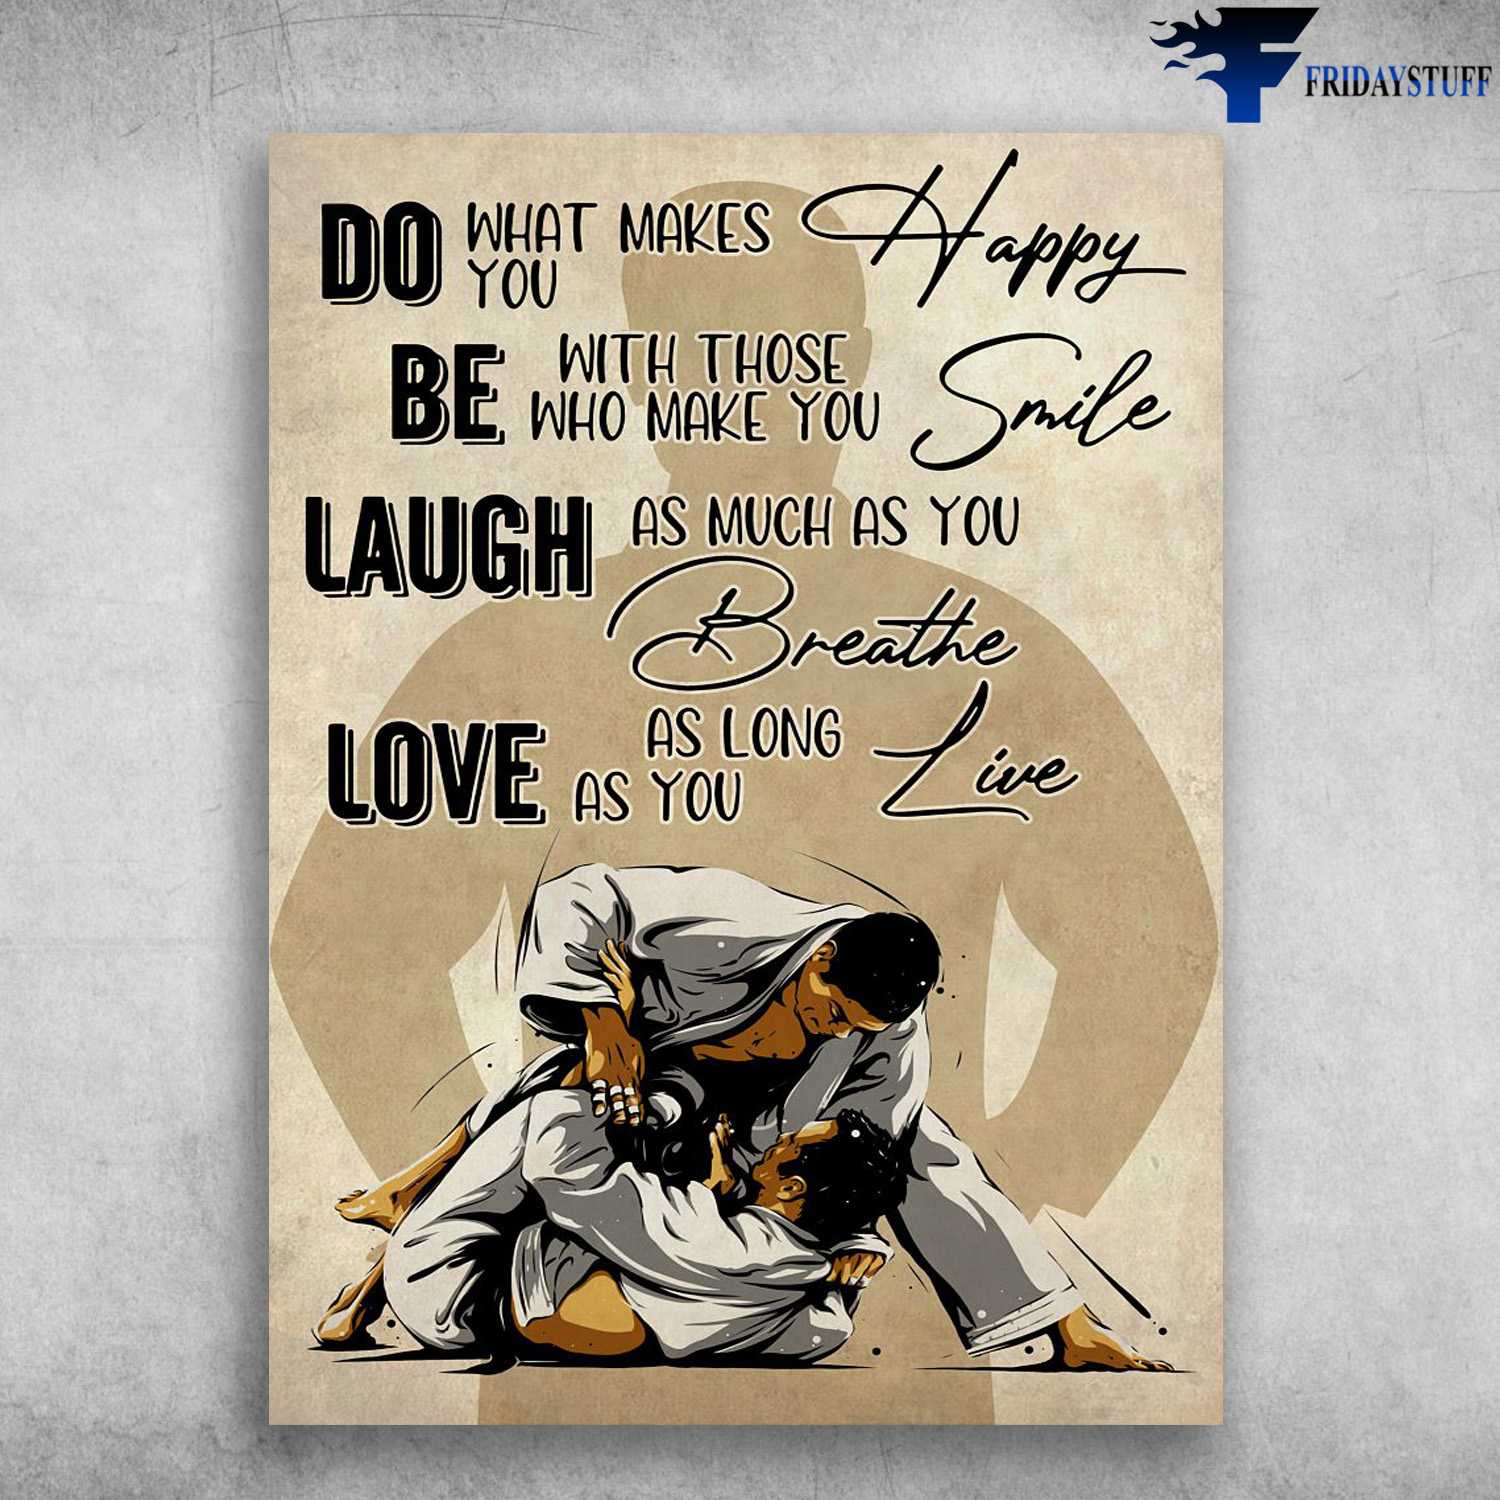 Jiu Jitsu Poster, Do What Makes You Happy, Be With Those Who Make You Smile, Laugh As Much As You Breathe, Love As Long As You Live